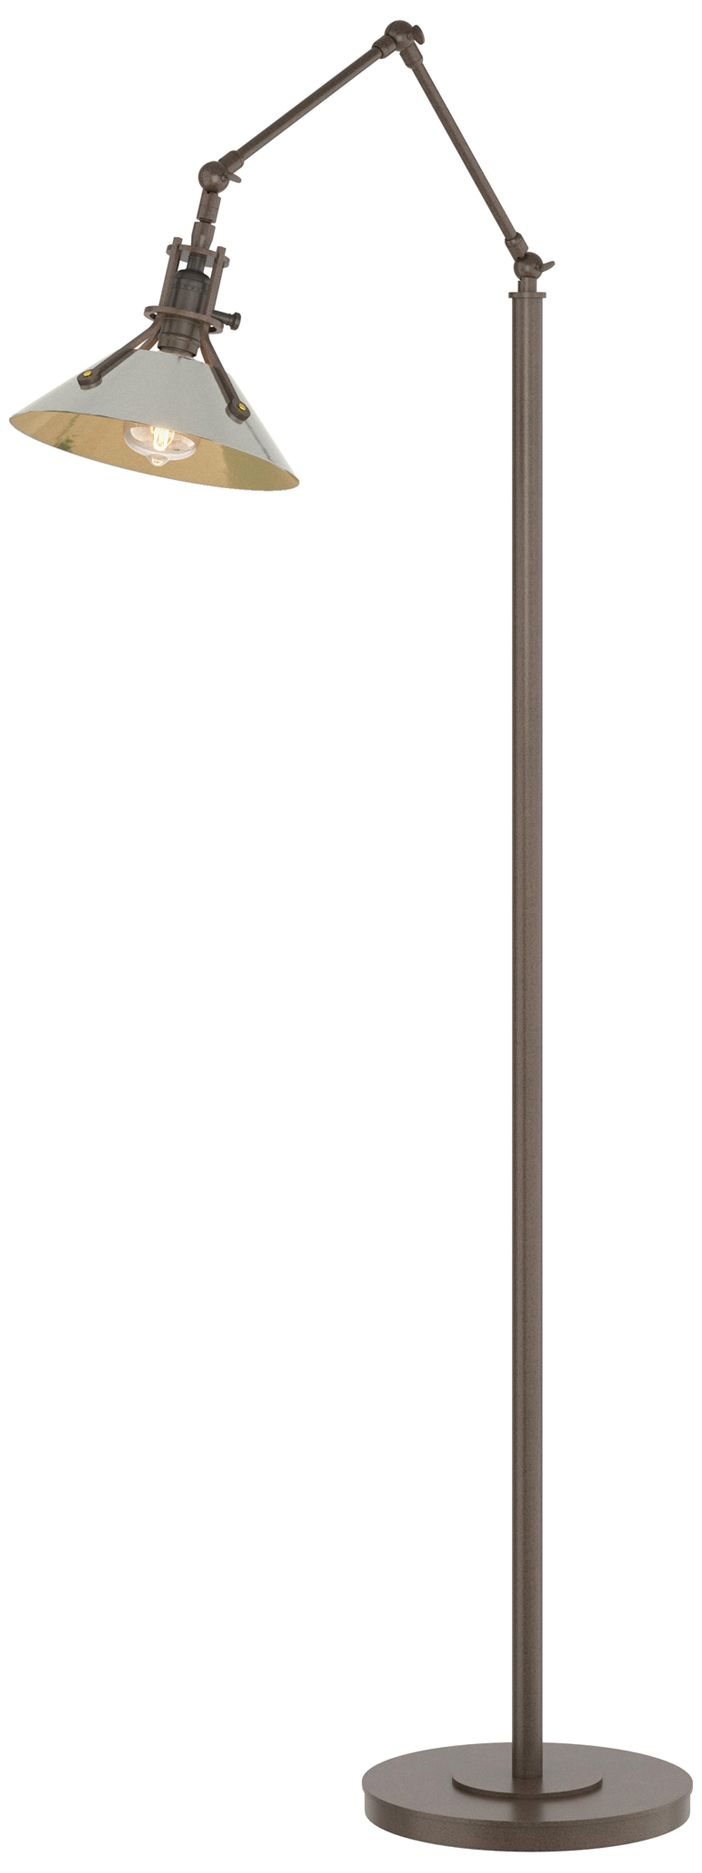 Henry Floor Lamp - Bronze Finish - Sterling Accents